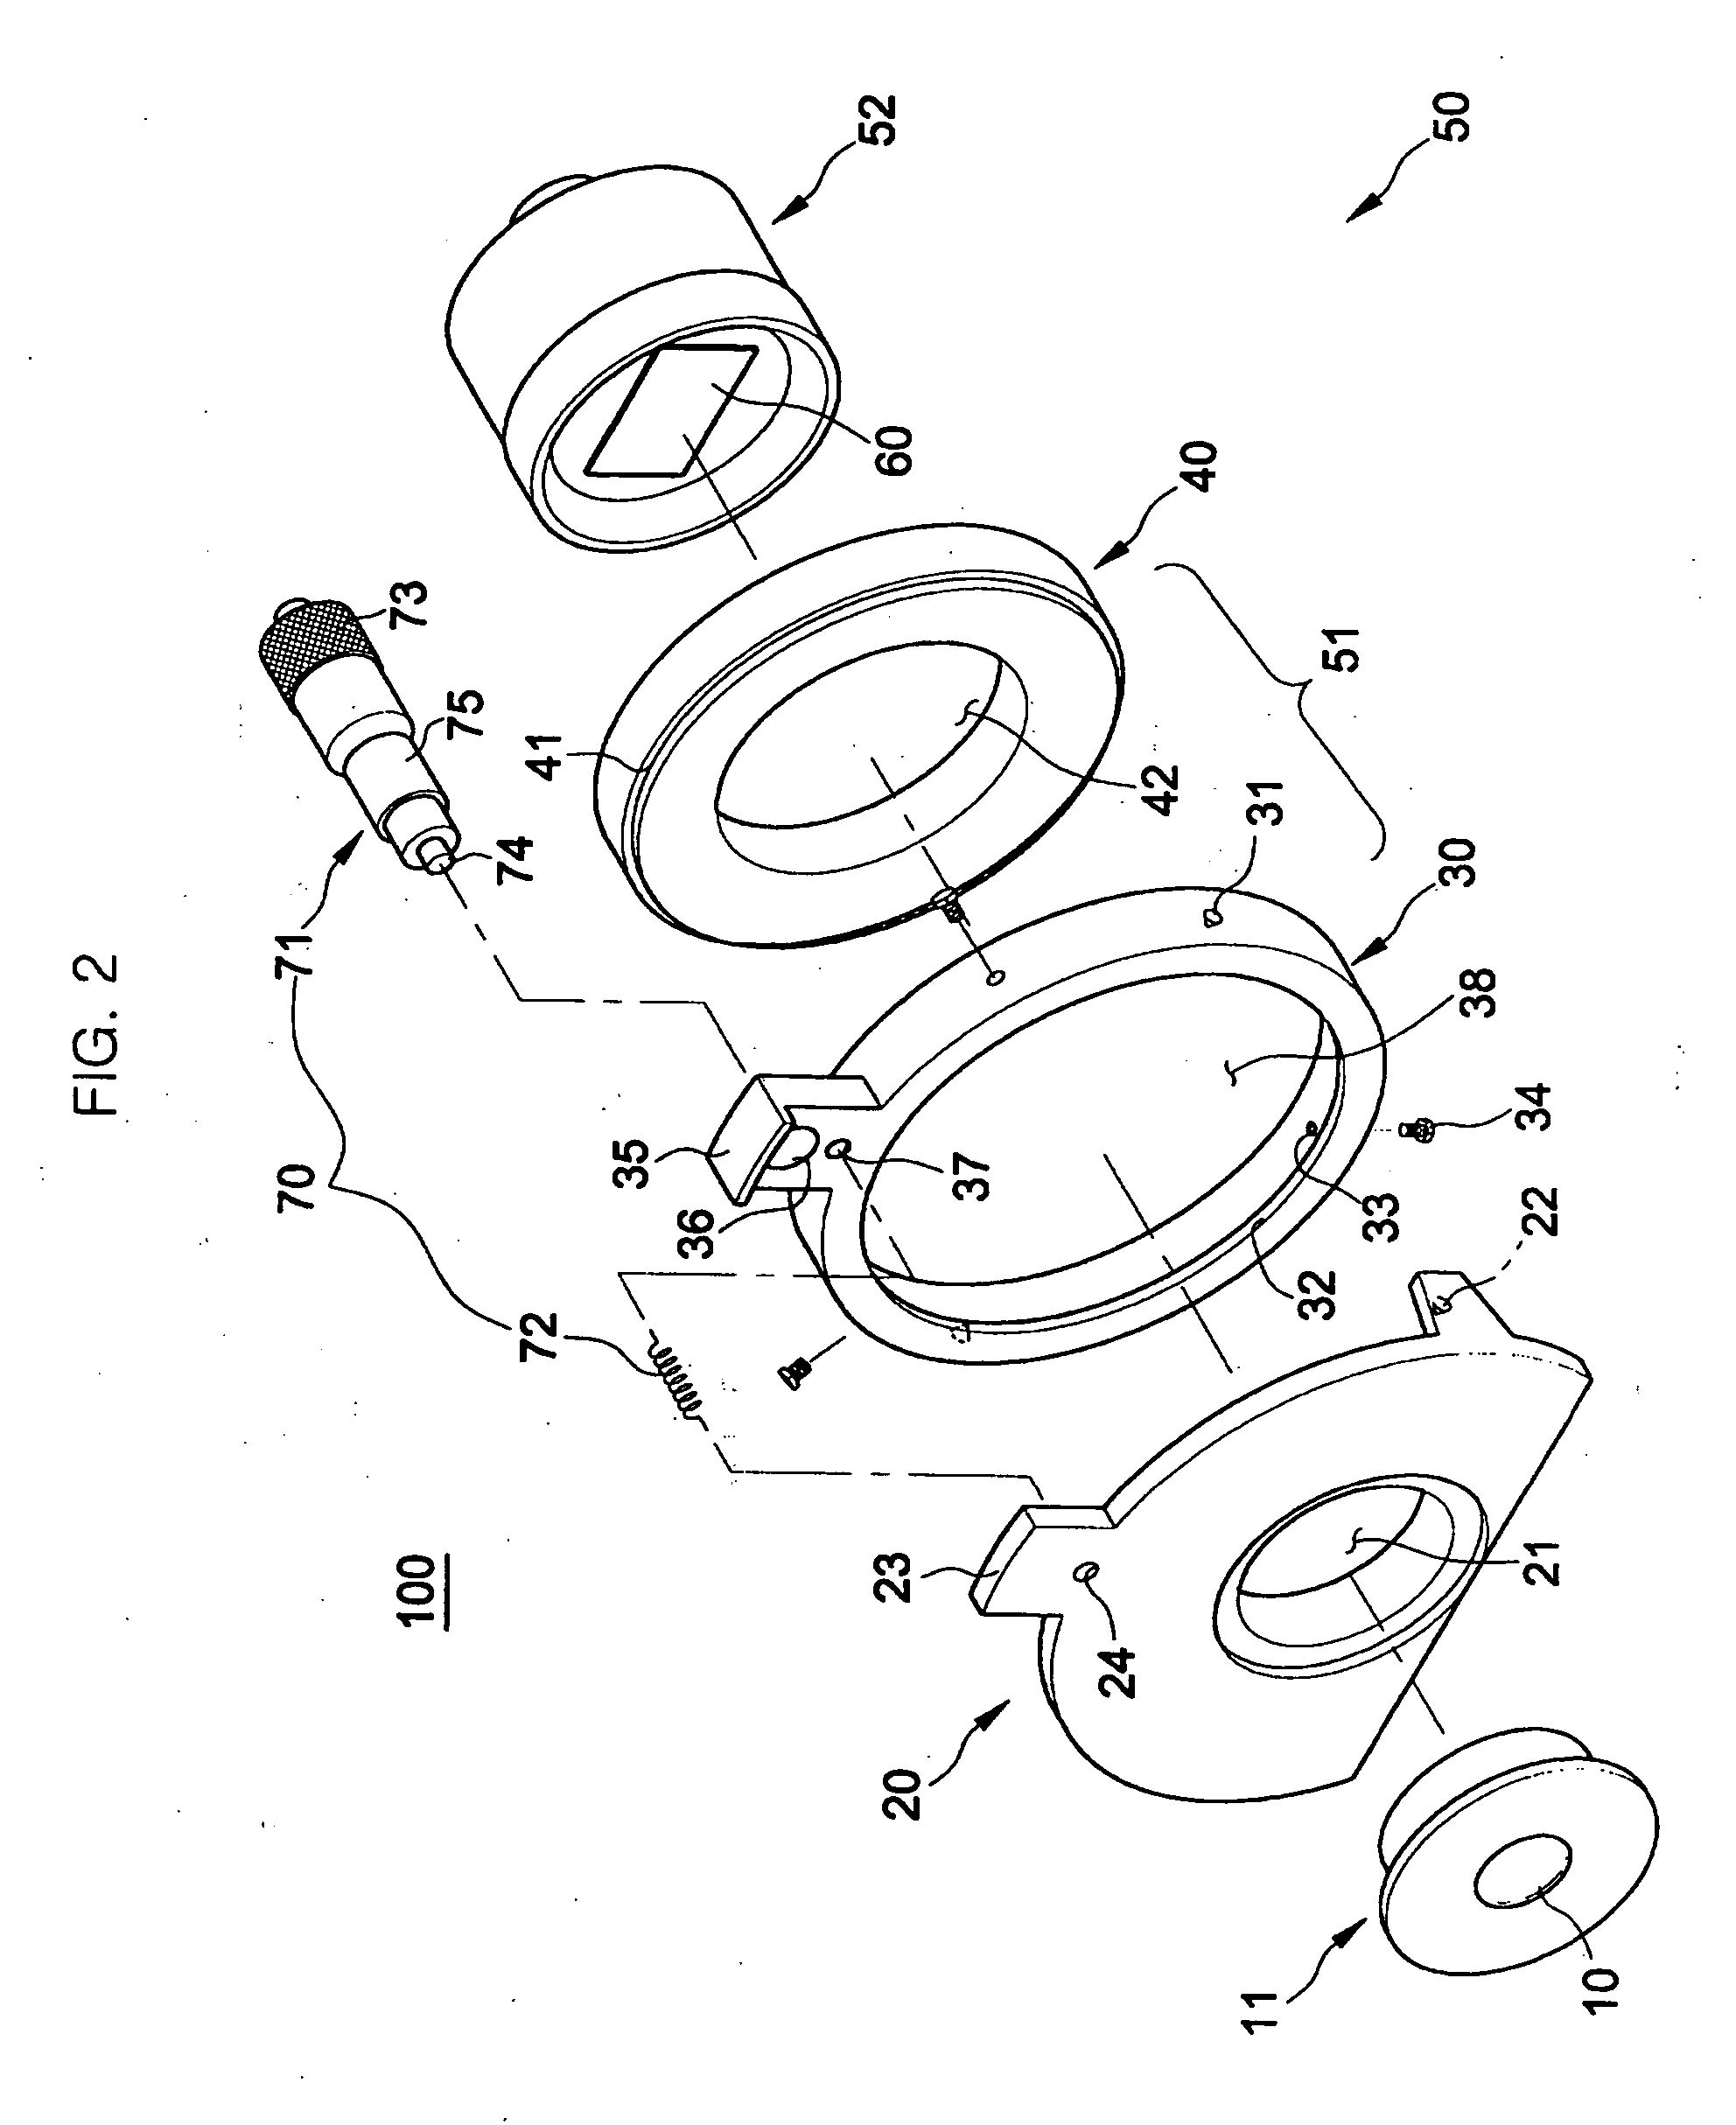 Optical system with image producing surface control unit